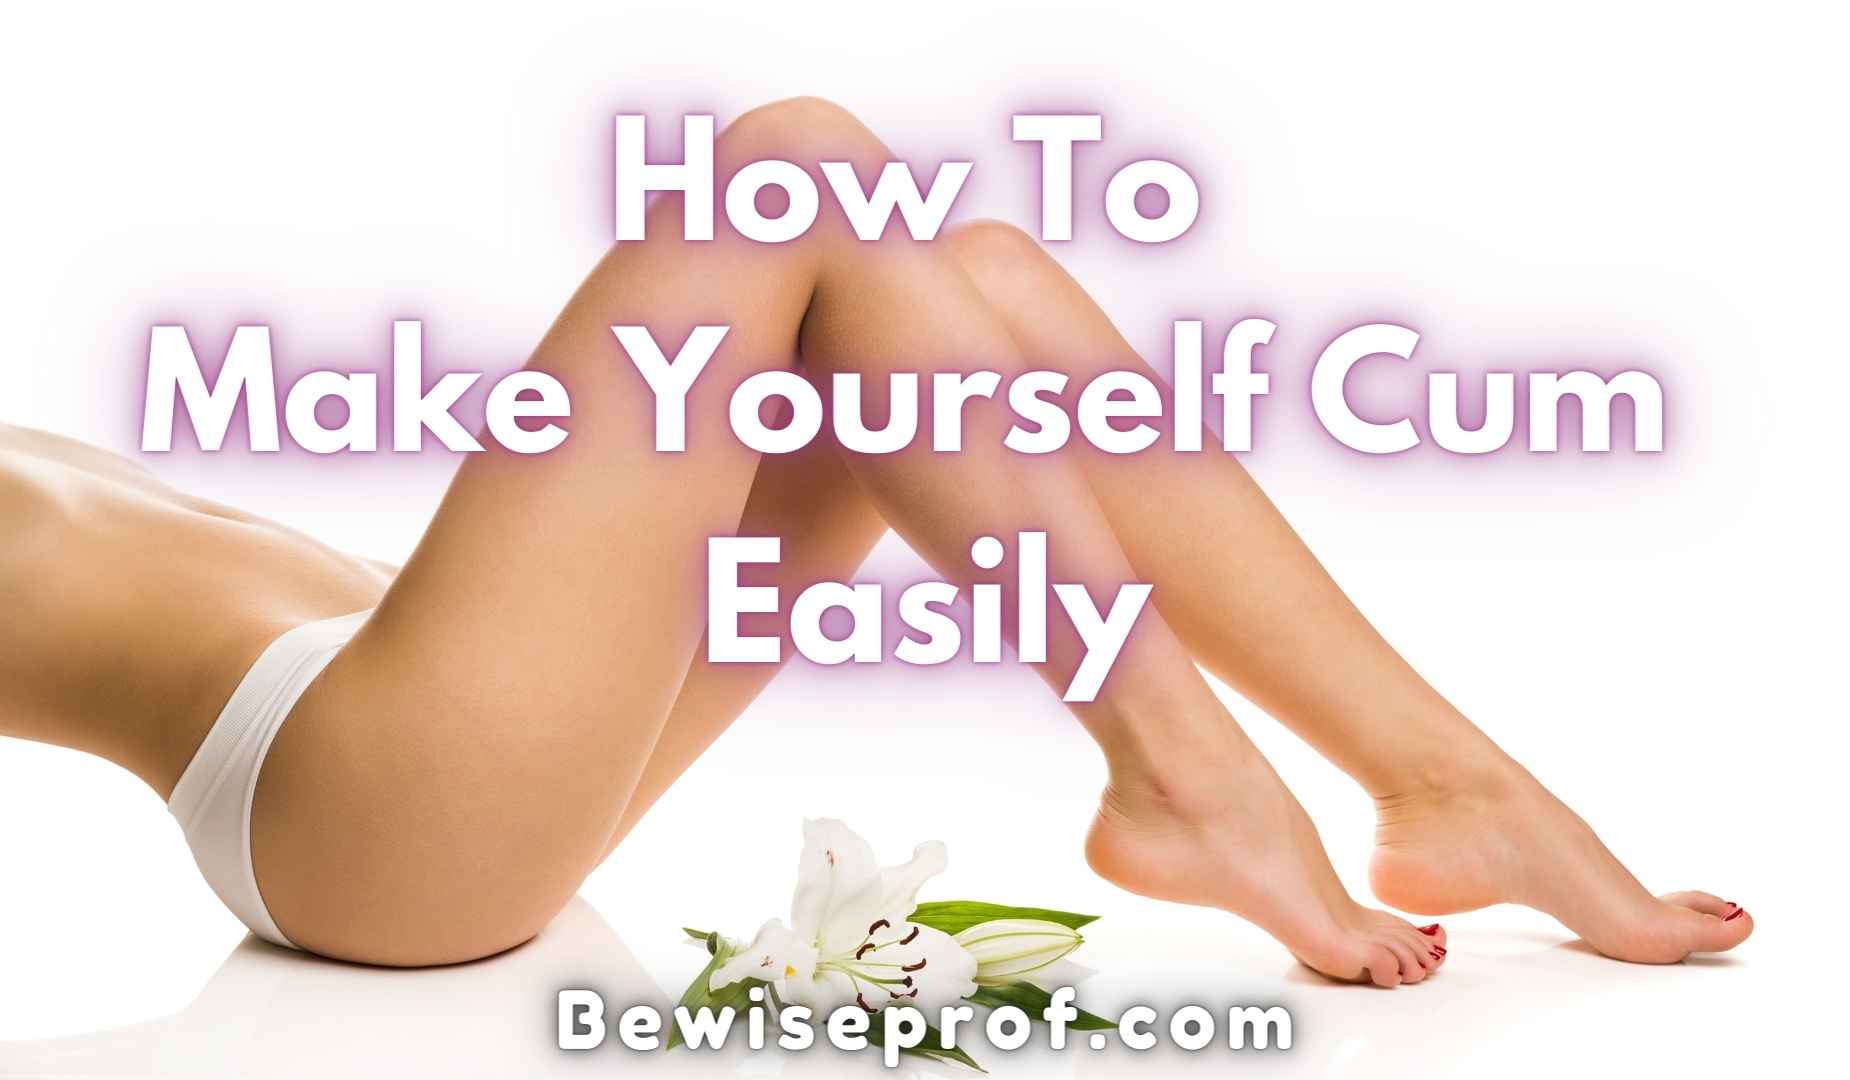 How To Make Yourself Cum Easily